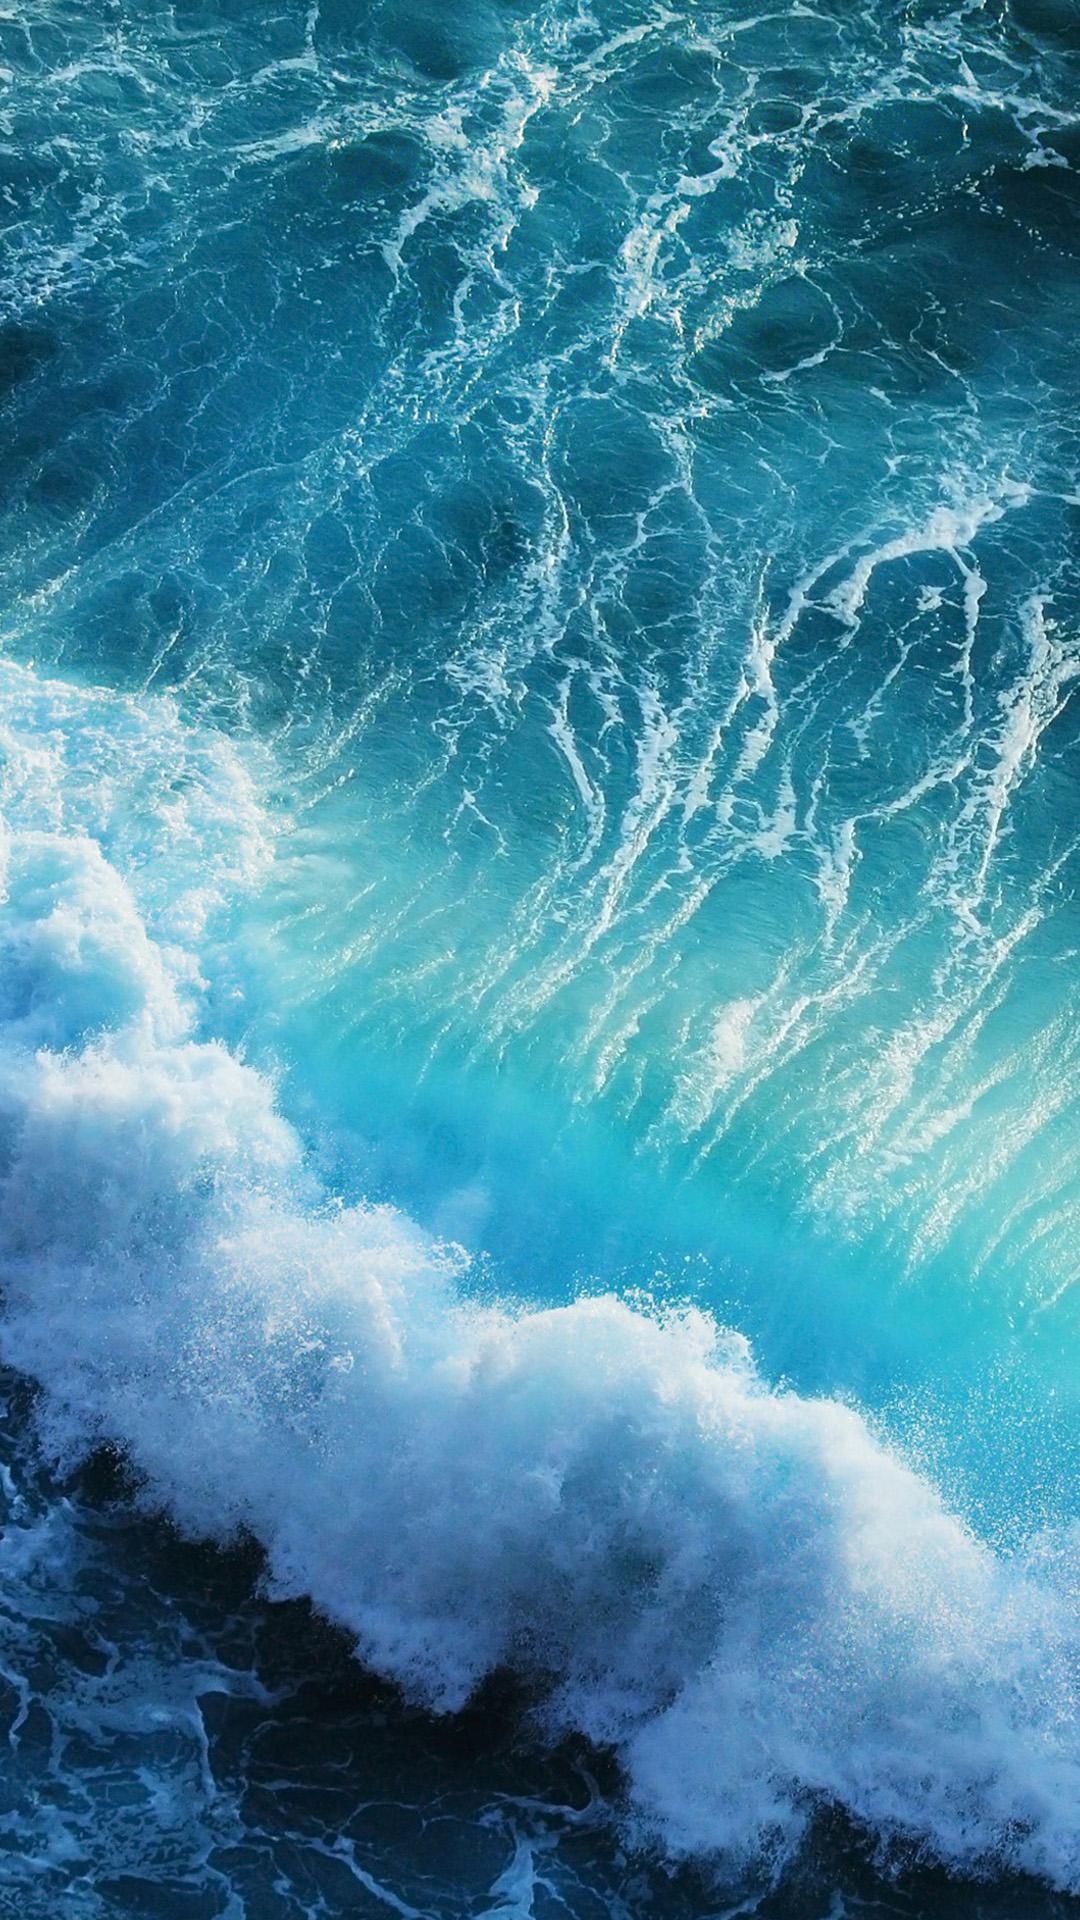 Free download Blue sea water wallpaper for iphone 6 plus